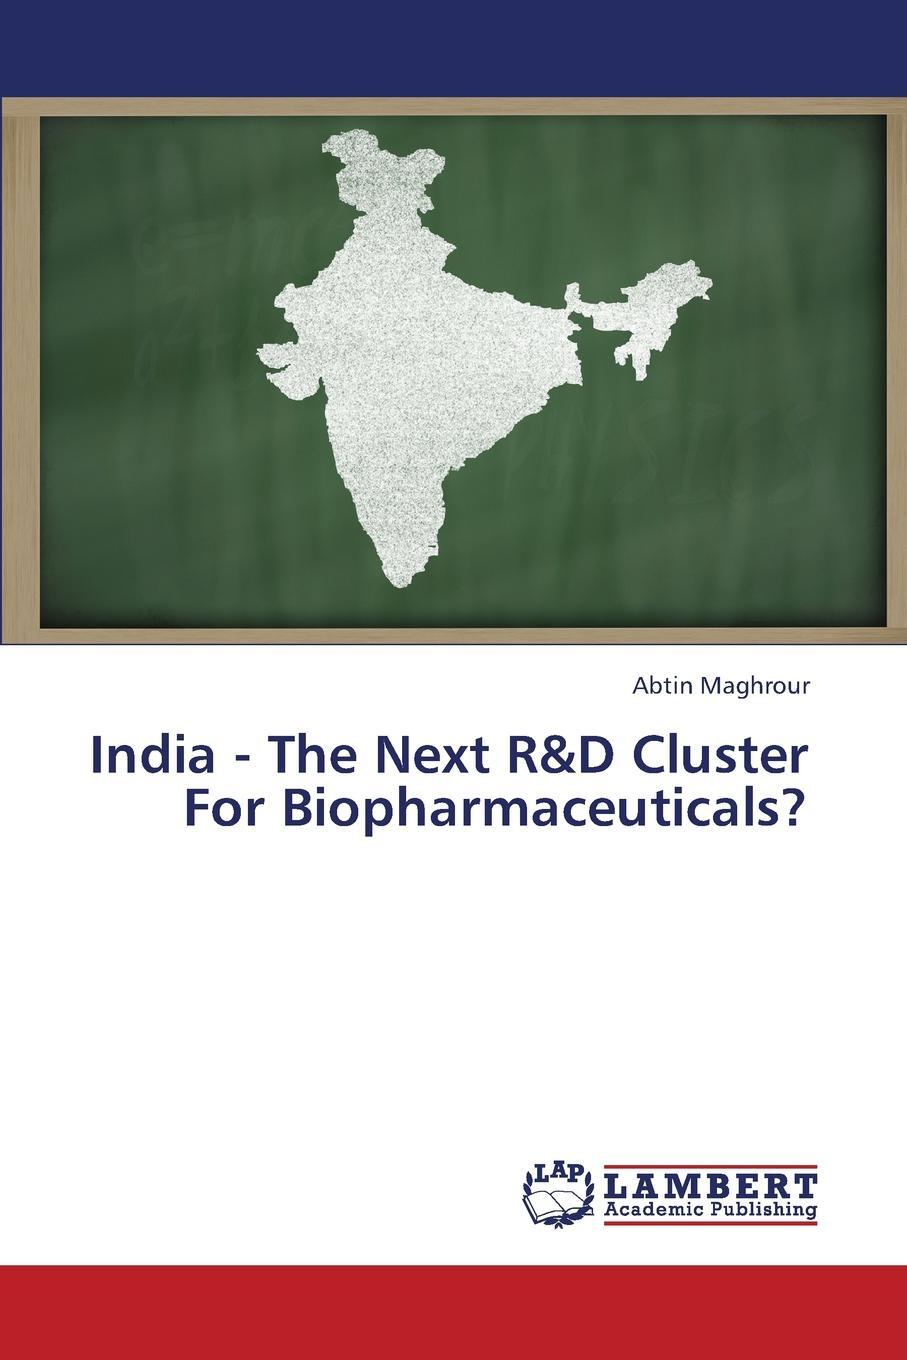 фото India - The Next R&D Cluster For Biopharmaceuticals?